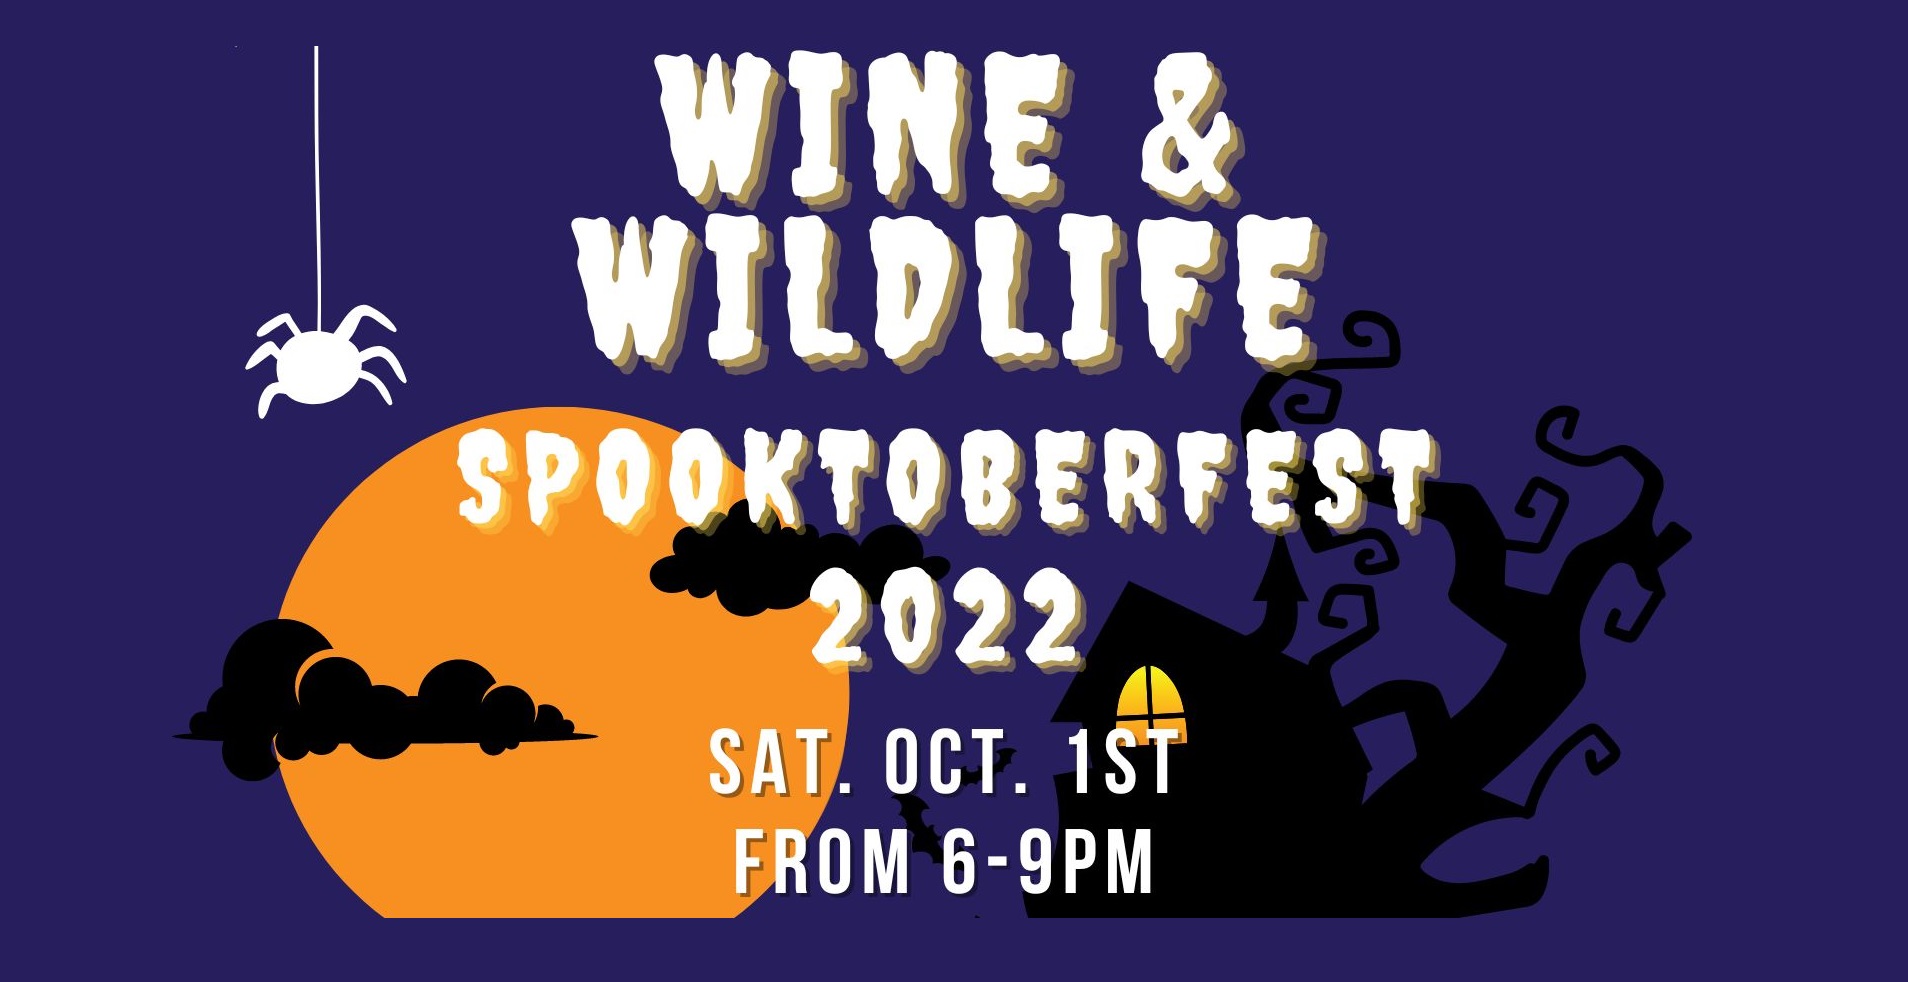 Join us at Butler Winery for Wine & Wildlife 2022!